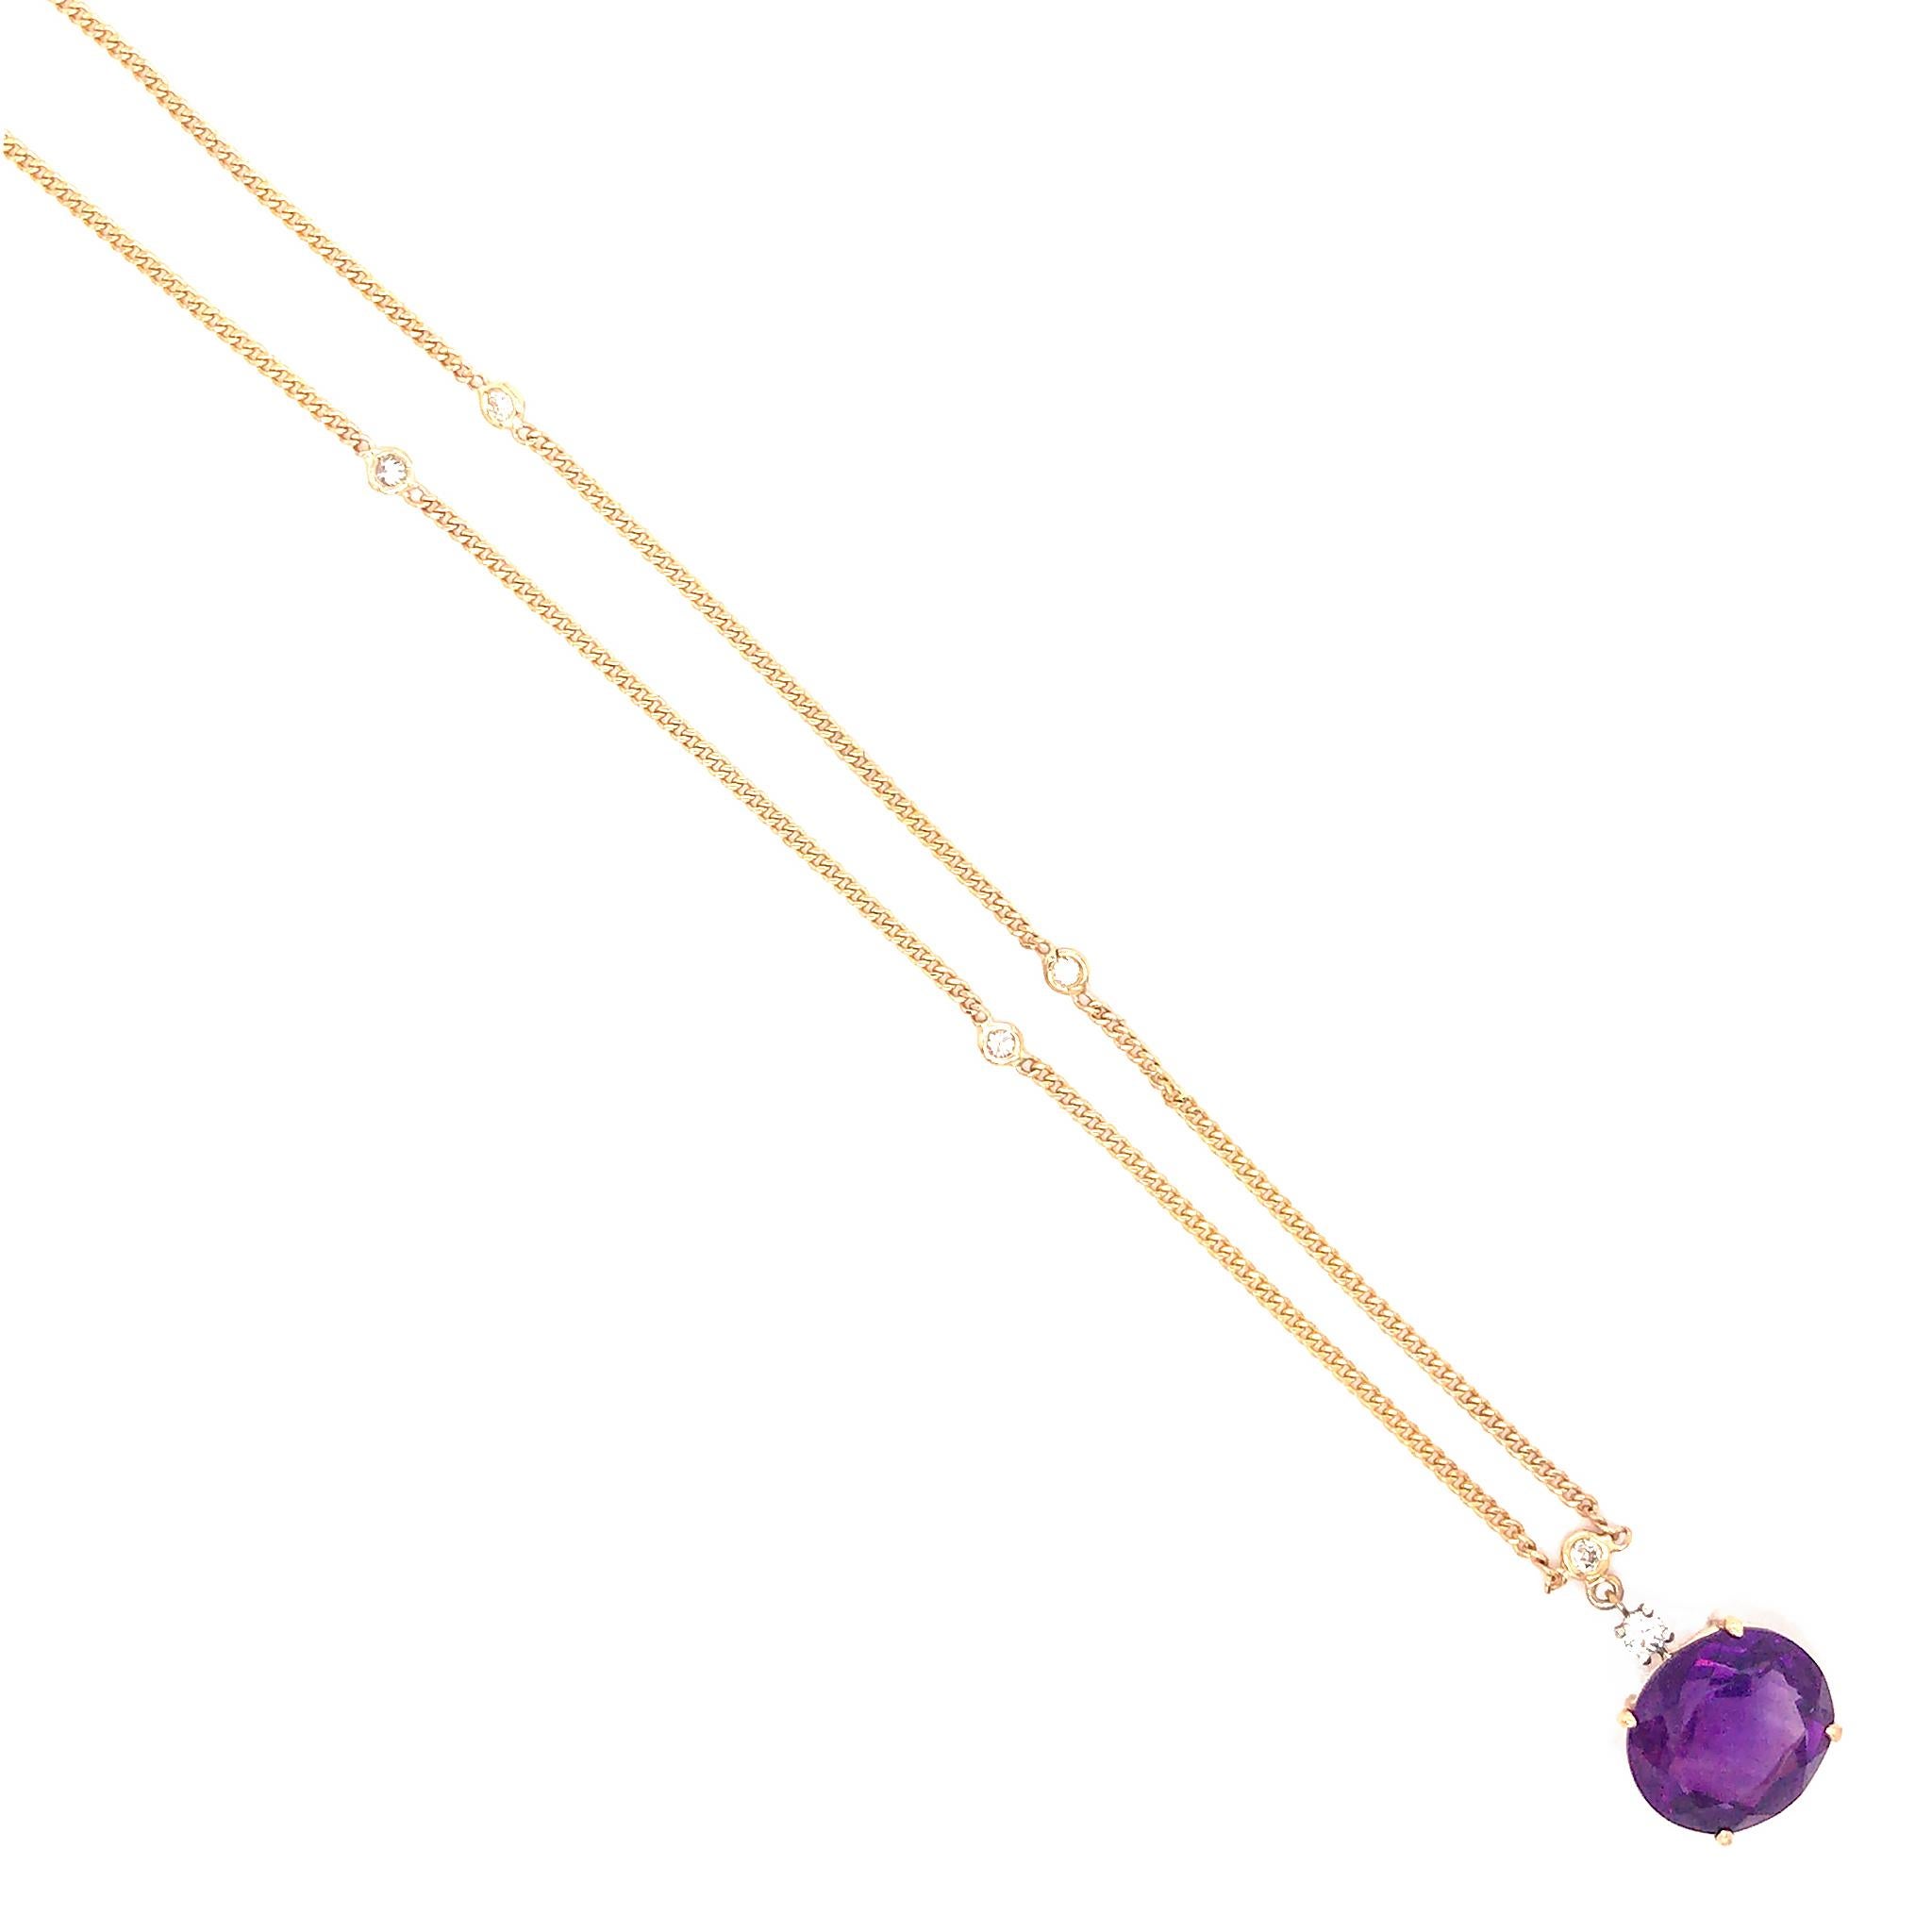 14k Yellow Gold
Amethyst: 6.00 ct twd (estimated)
Diamond: 0.35 tcw
Total Weight: 6.2 grams